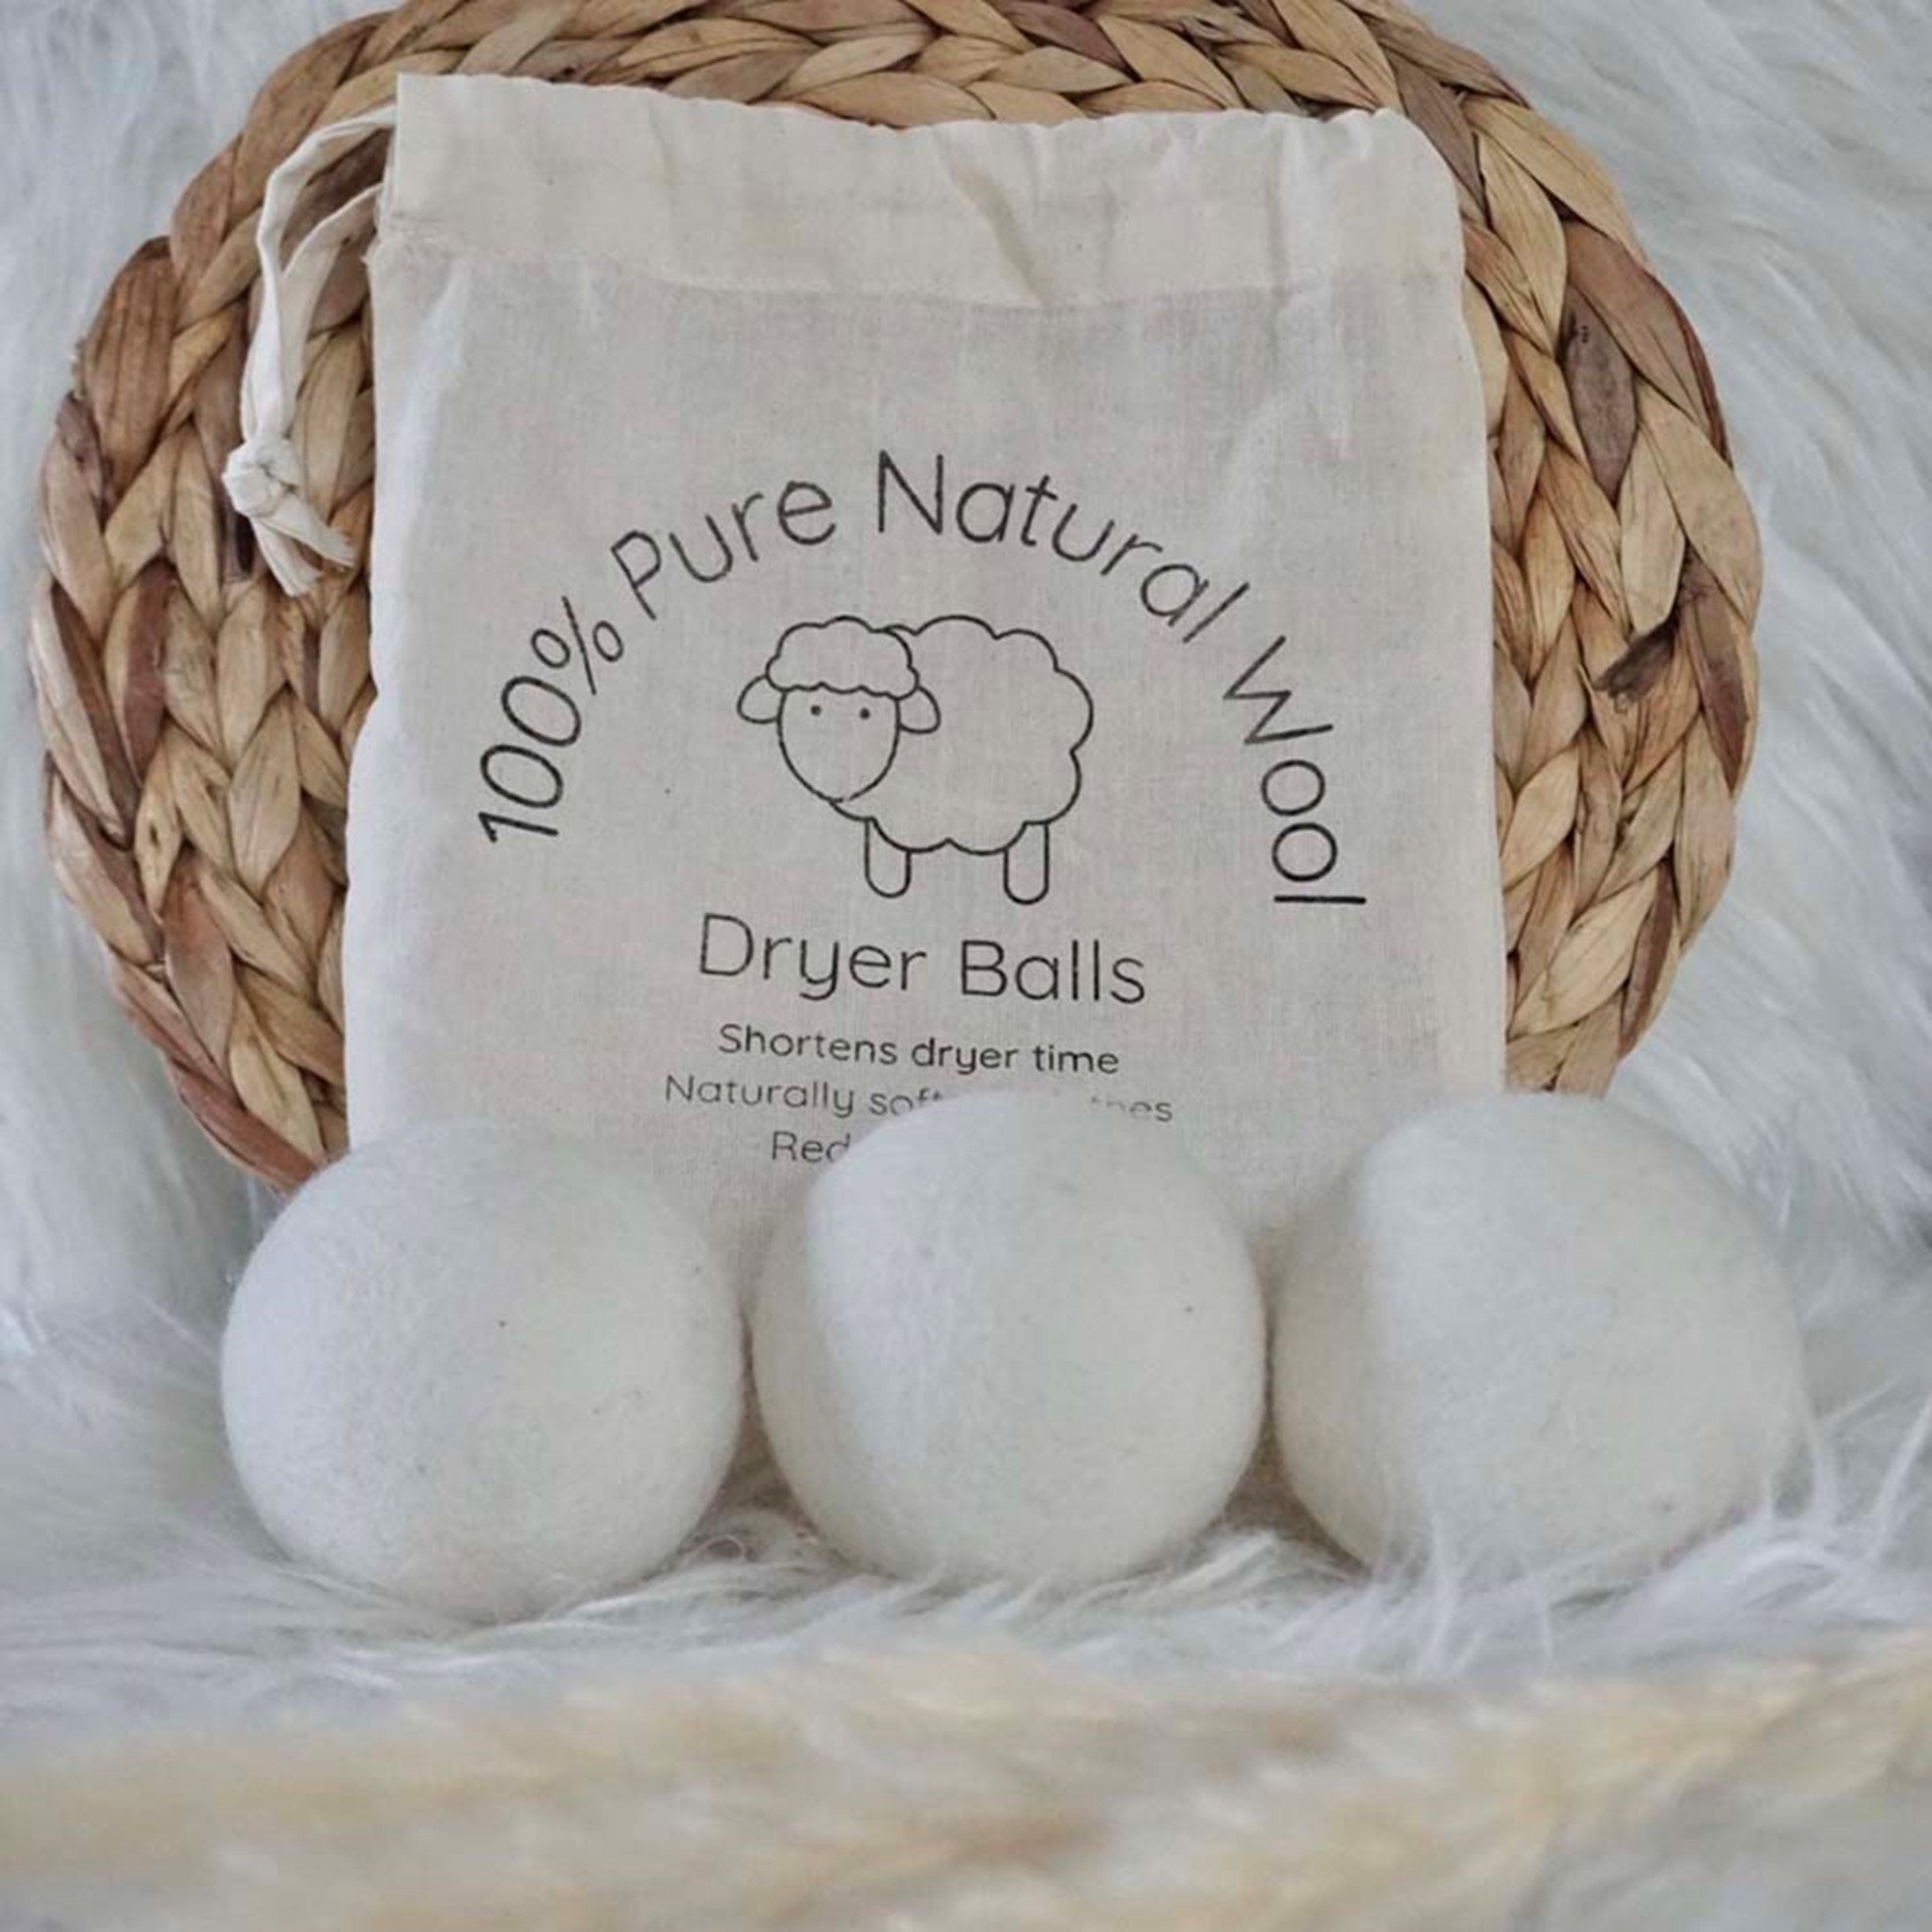 100% Natural Tumble Dryer Balls made in Nepal from Wool 